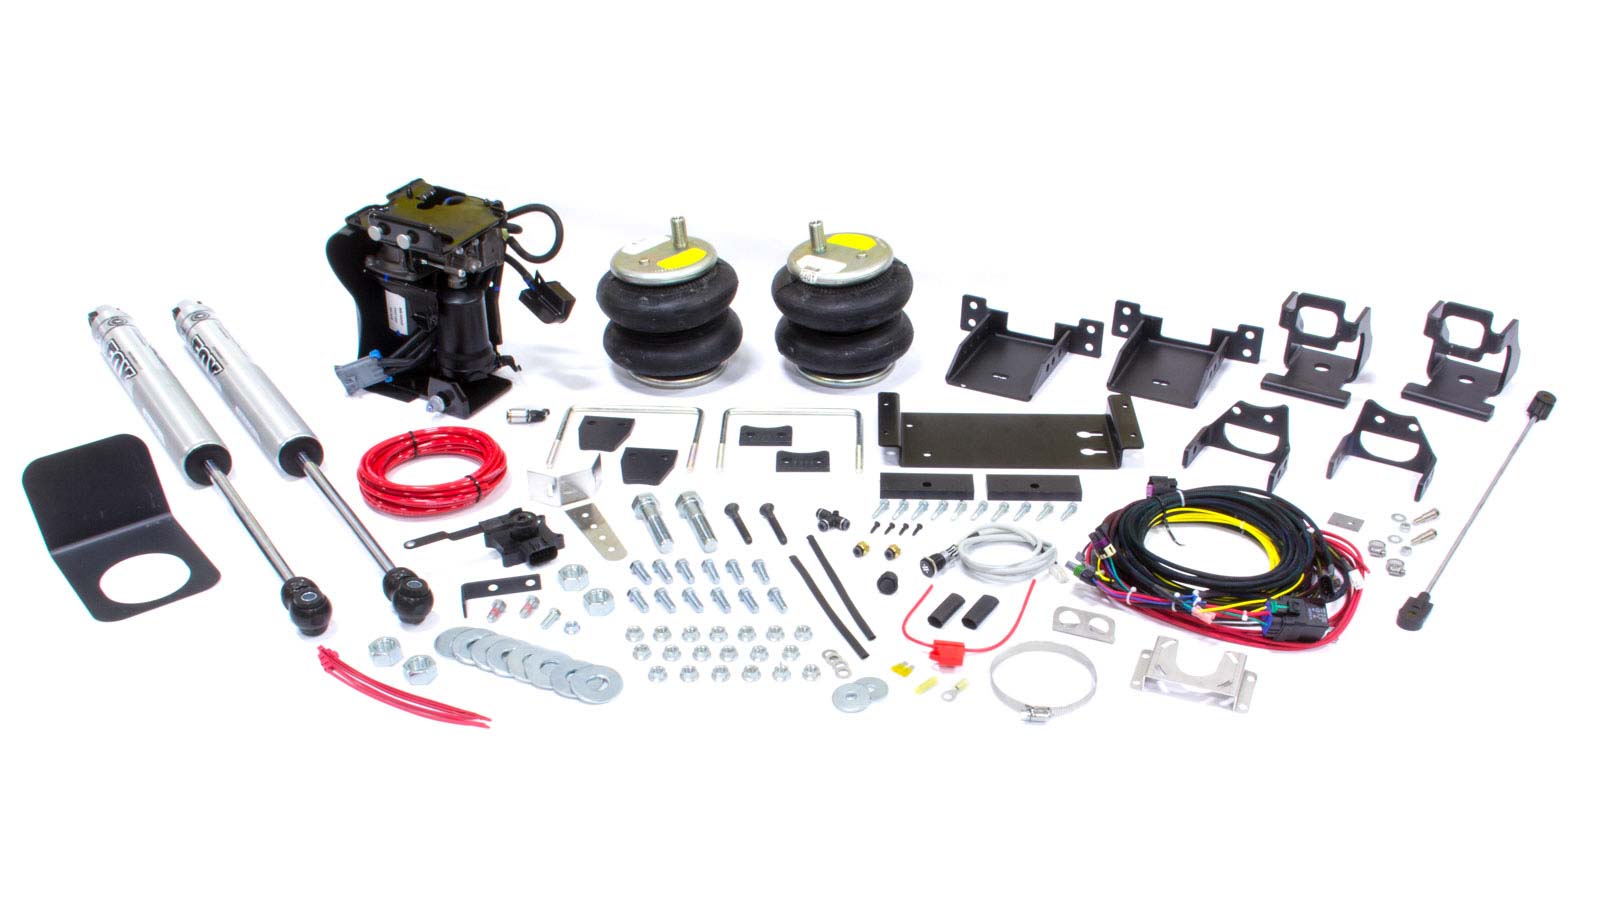 Frame Kits & Connectors: Buy Frame Kits & Connectors In Automotive at Sears